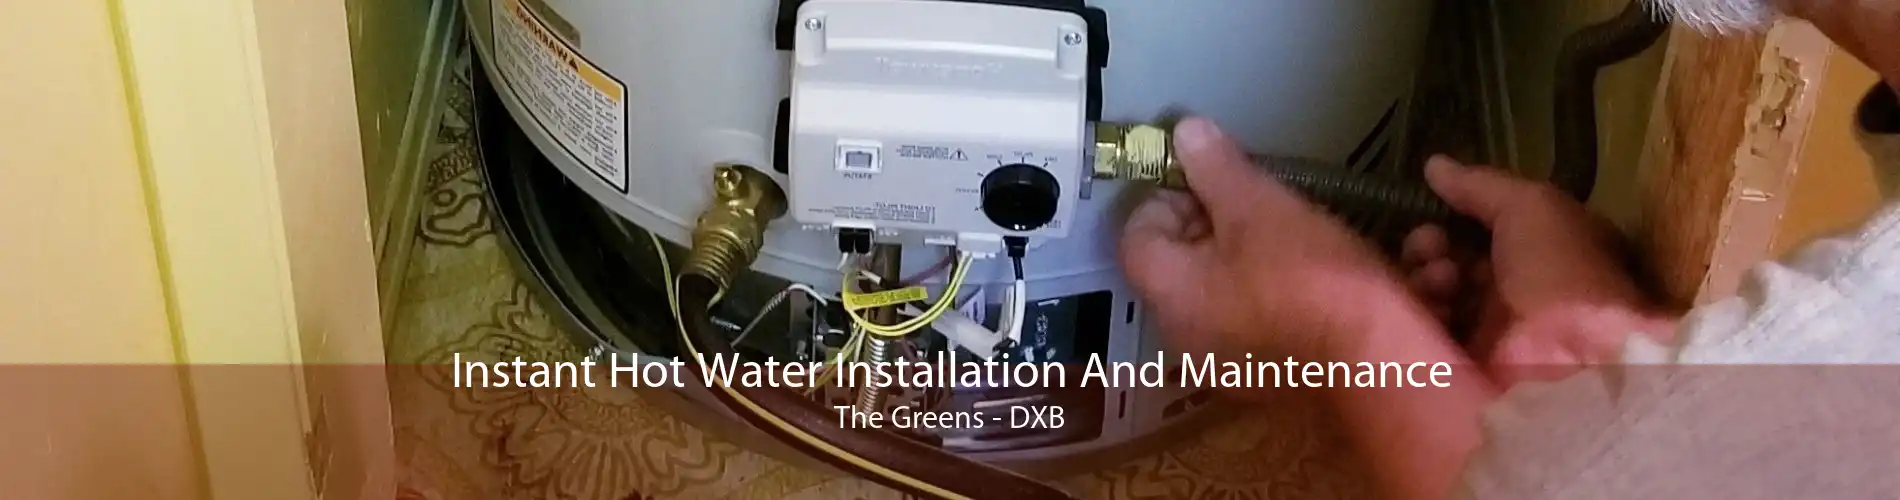 Instant Hot Water Installation And Maintenance The Greens - DXB